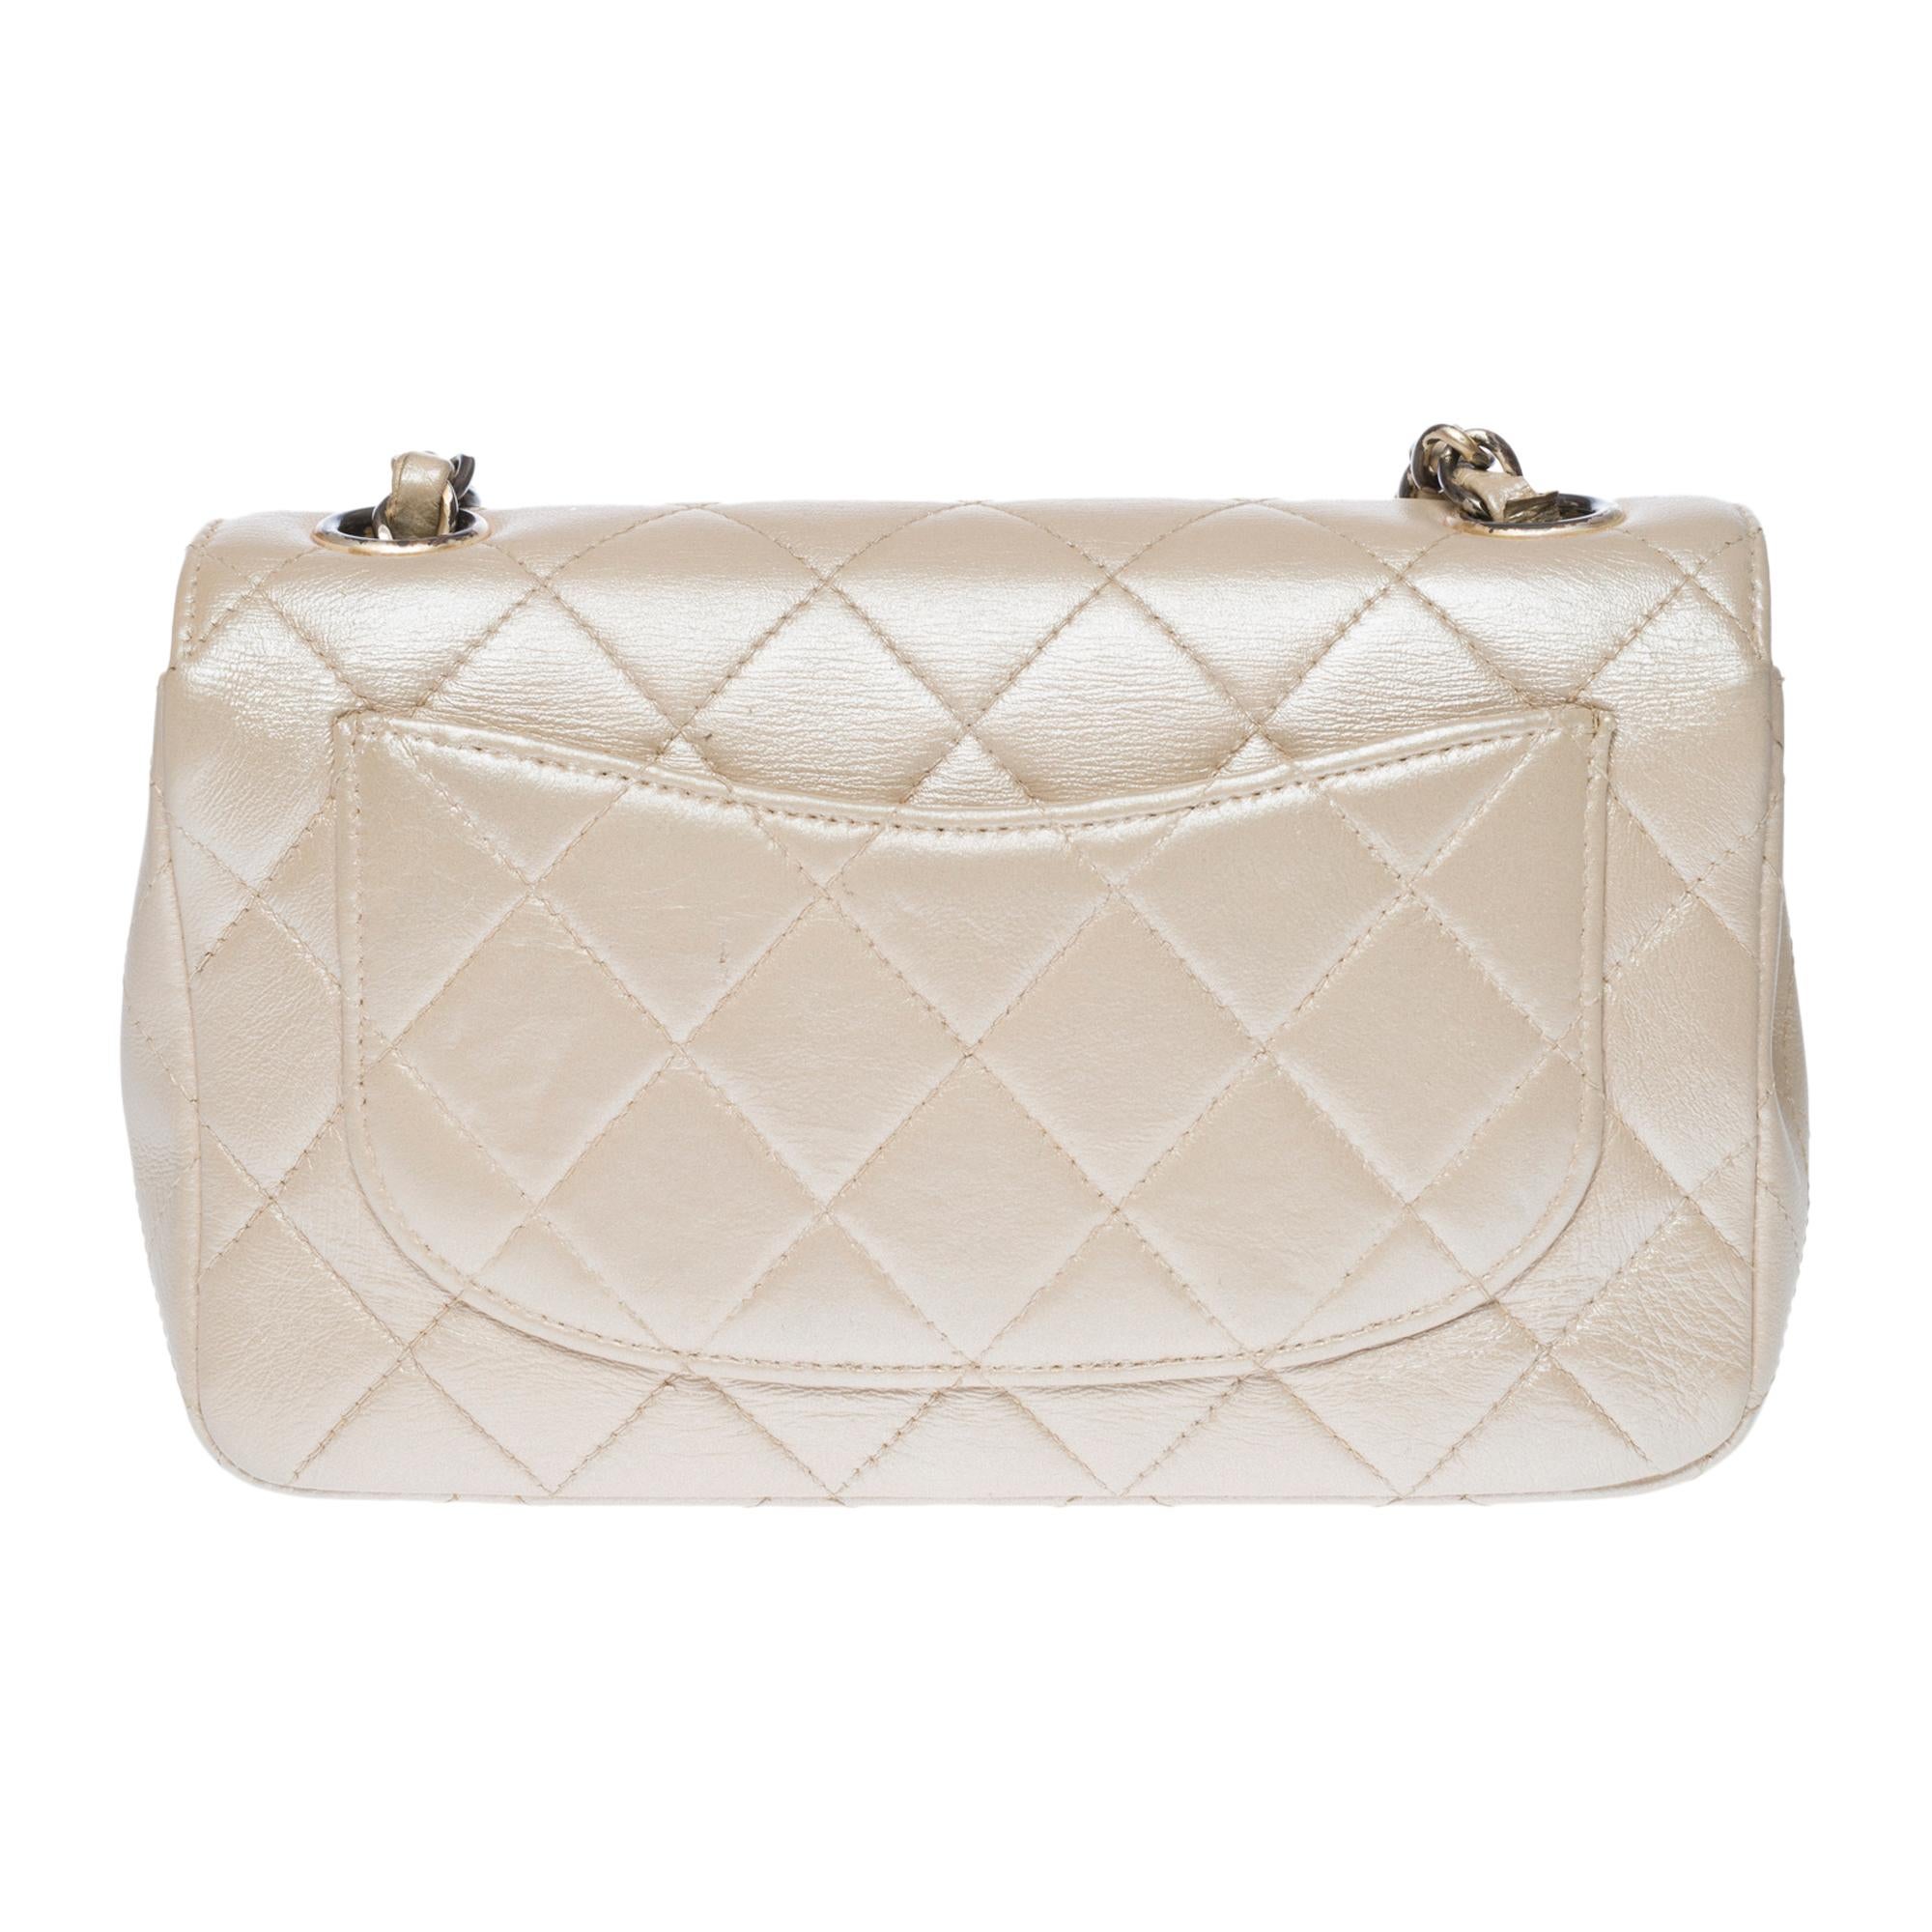 Rare Chanel Timeless Mini flap shoulder bag in metallic mother-of-pearl quilted leather, gold-plated metal hardware, a gold-plated metal chain handle interlaced with metallic mother-of-pearl leather for hand, shoulder or crossbody support

CC